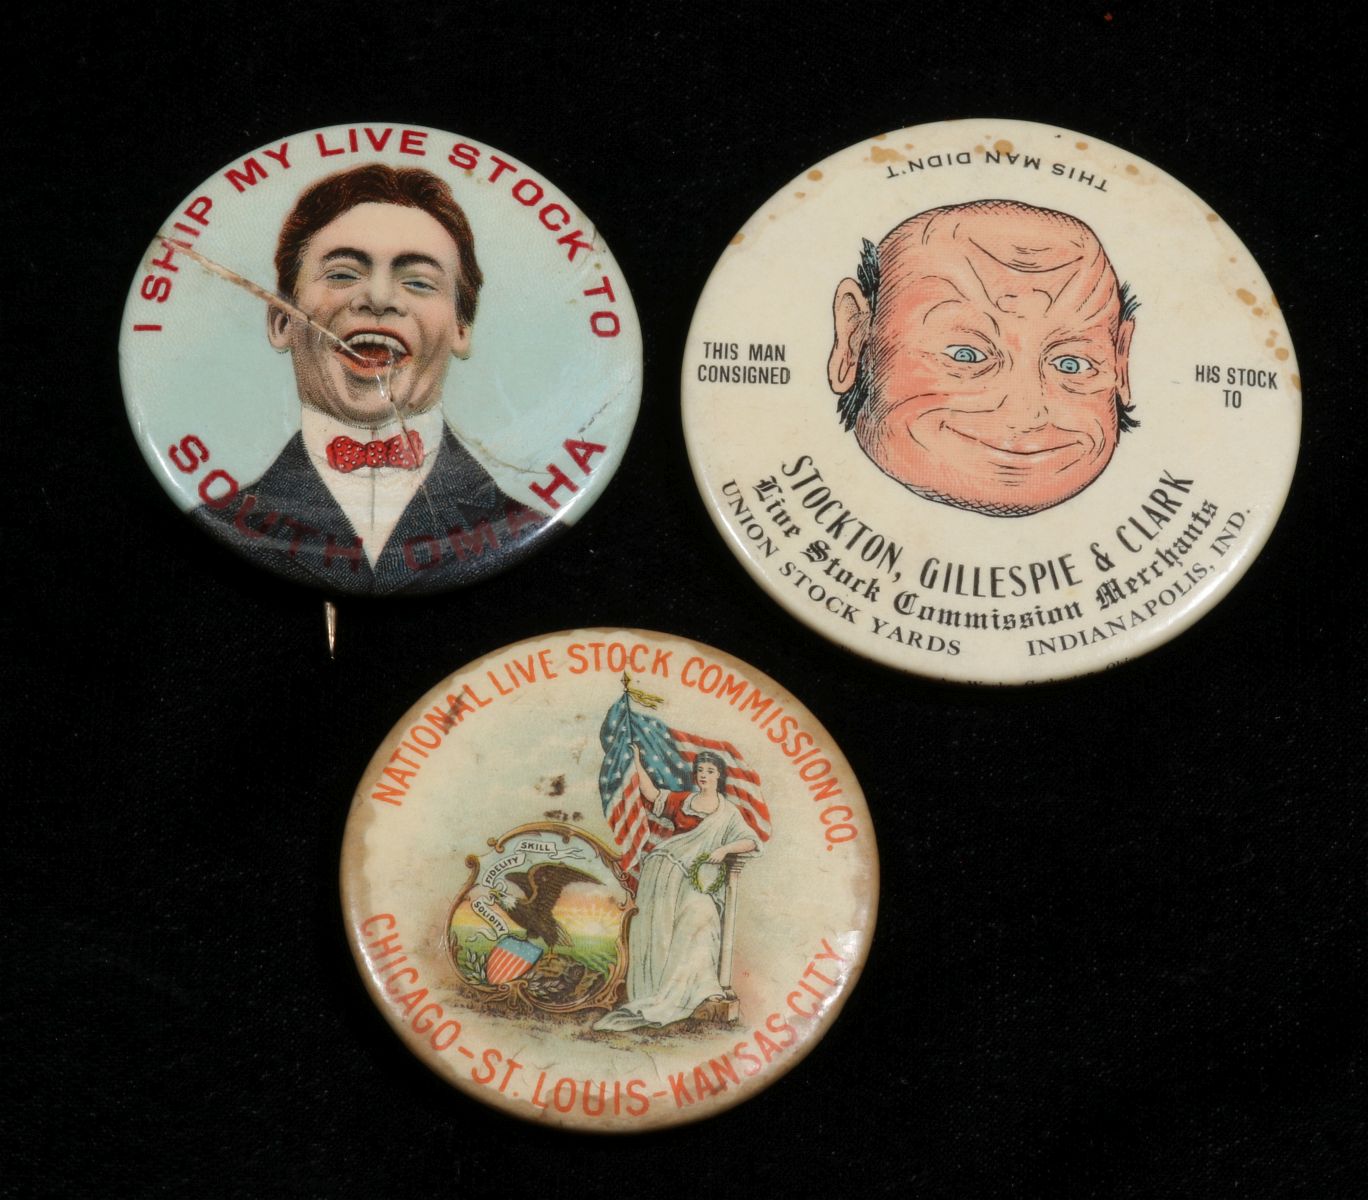 VINTAGE ADVERTISING BUTTONS AND POCKET MIRRORS